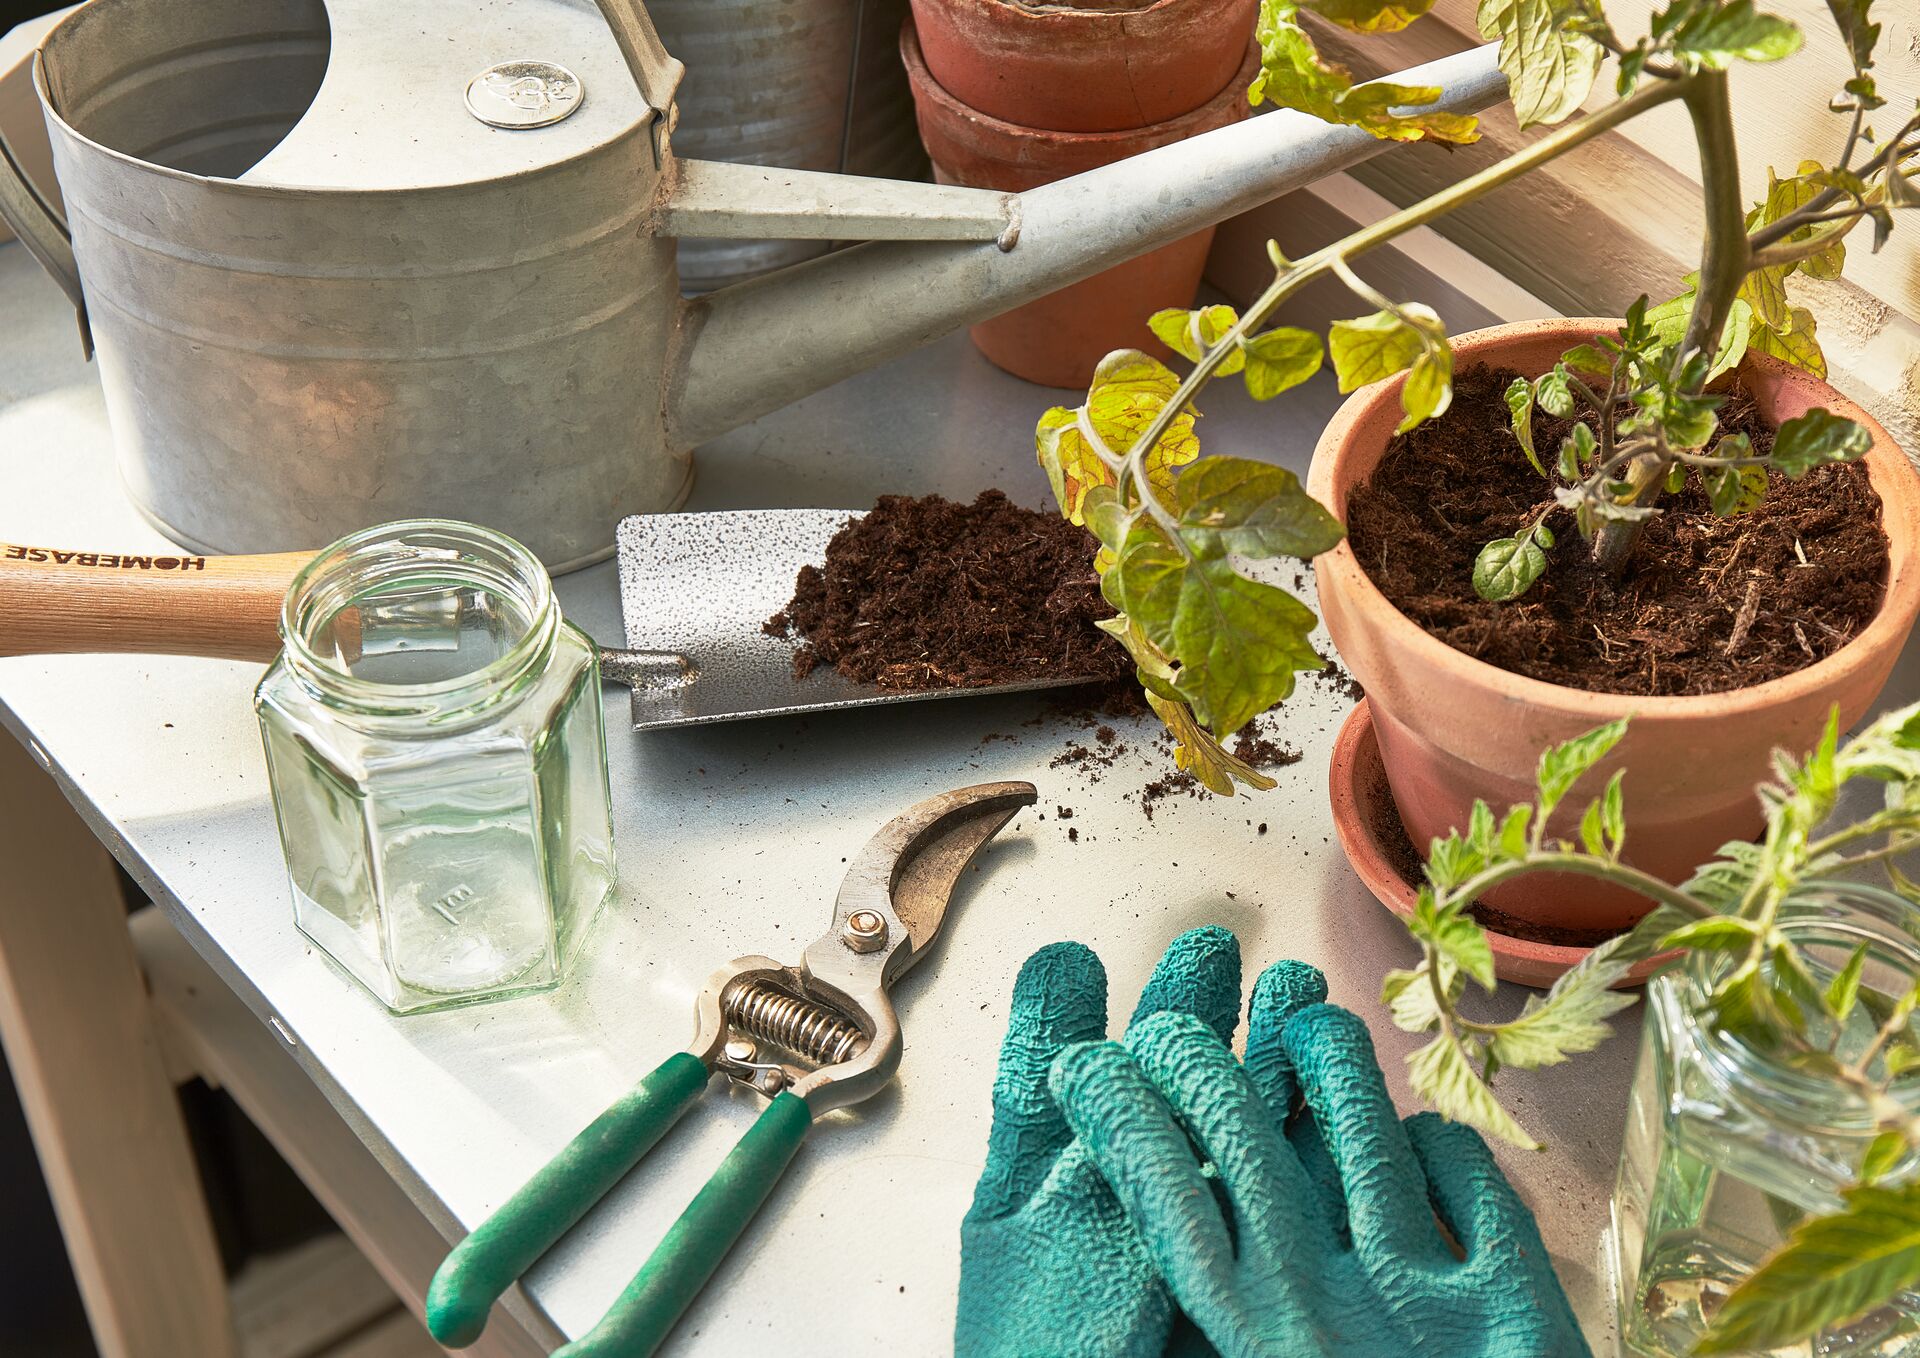 Various planting items on a greenhouse table including a potted plant, trowel, watering can and gardening gloves.